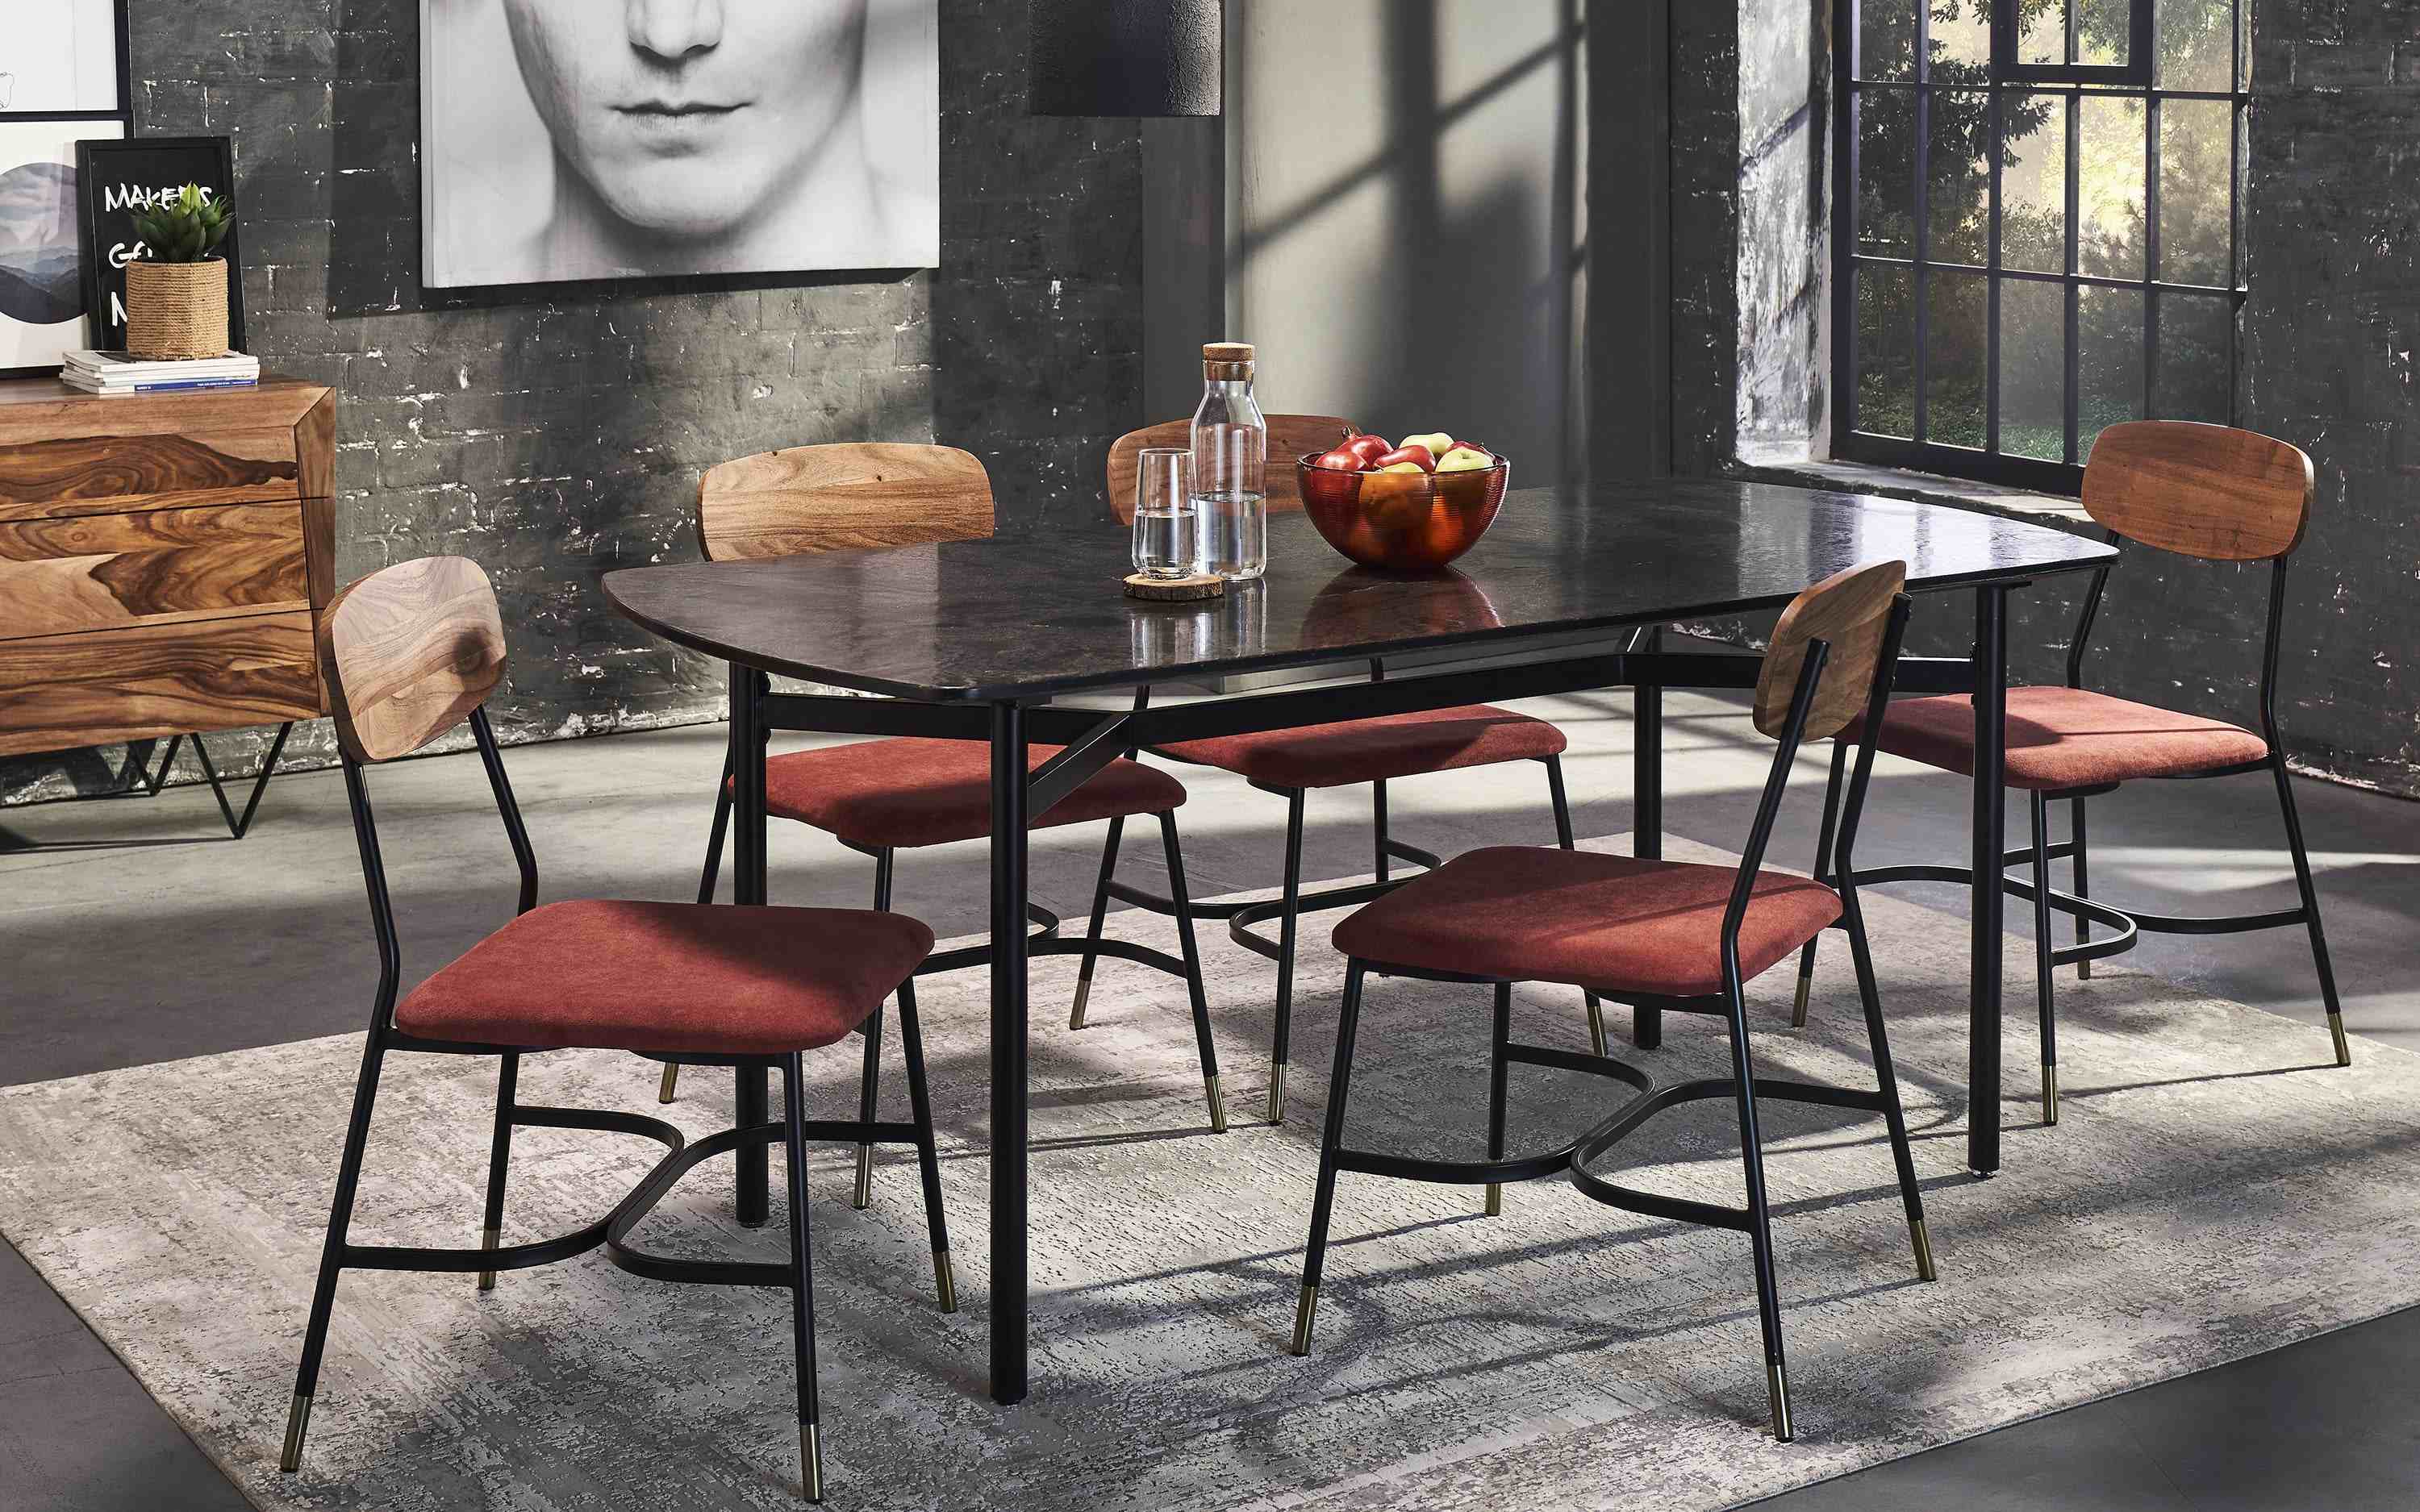 Ipiano Dining Table 6 Seater black stone top designa in dining troom with 6 chairs